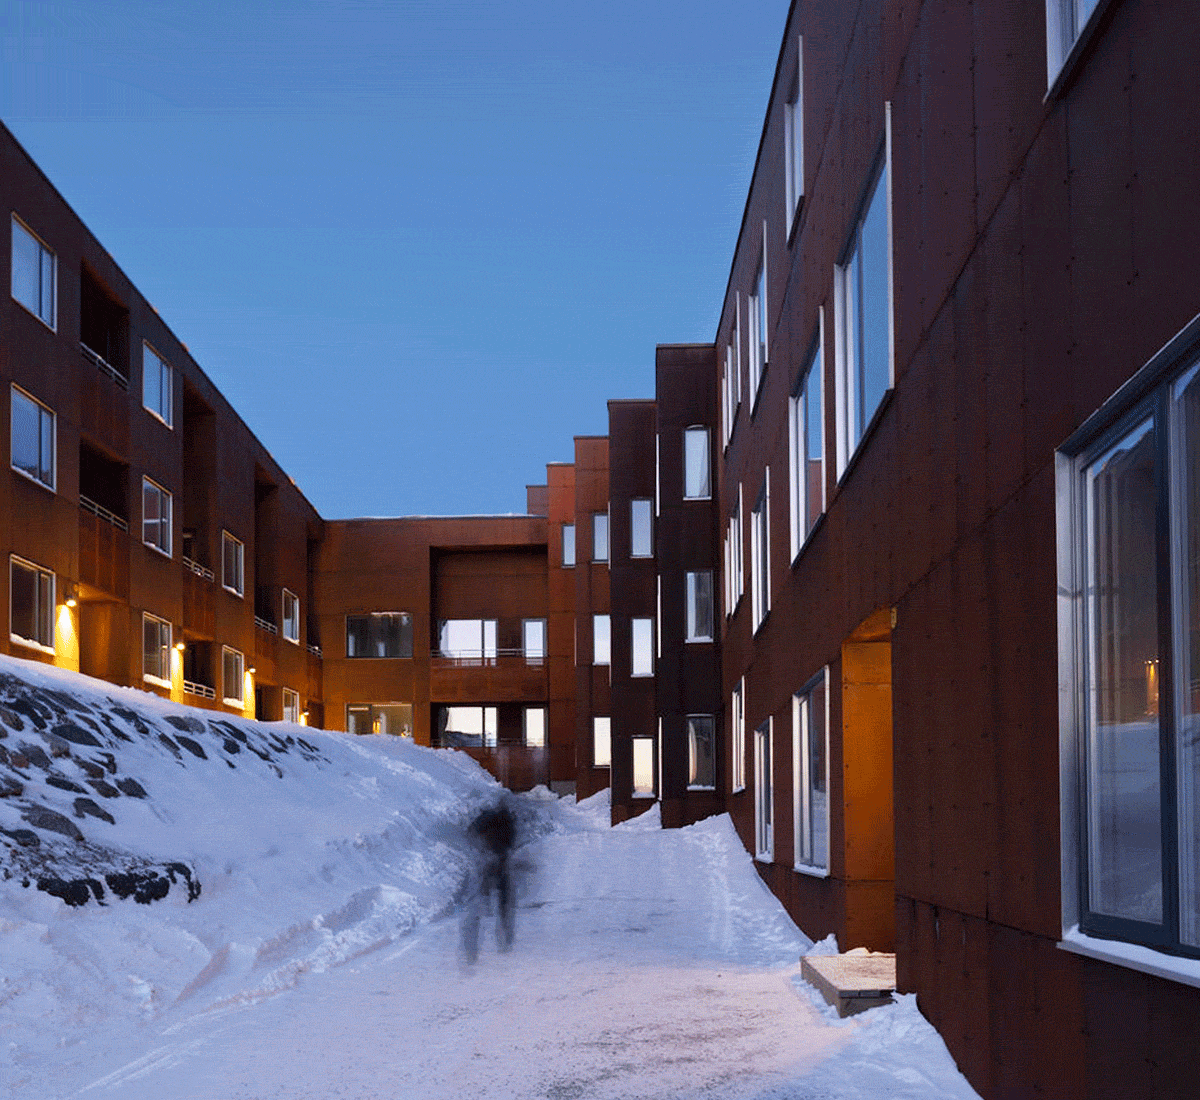 Greenland apartments surrounded by snow